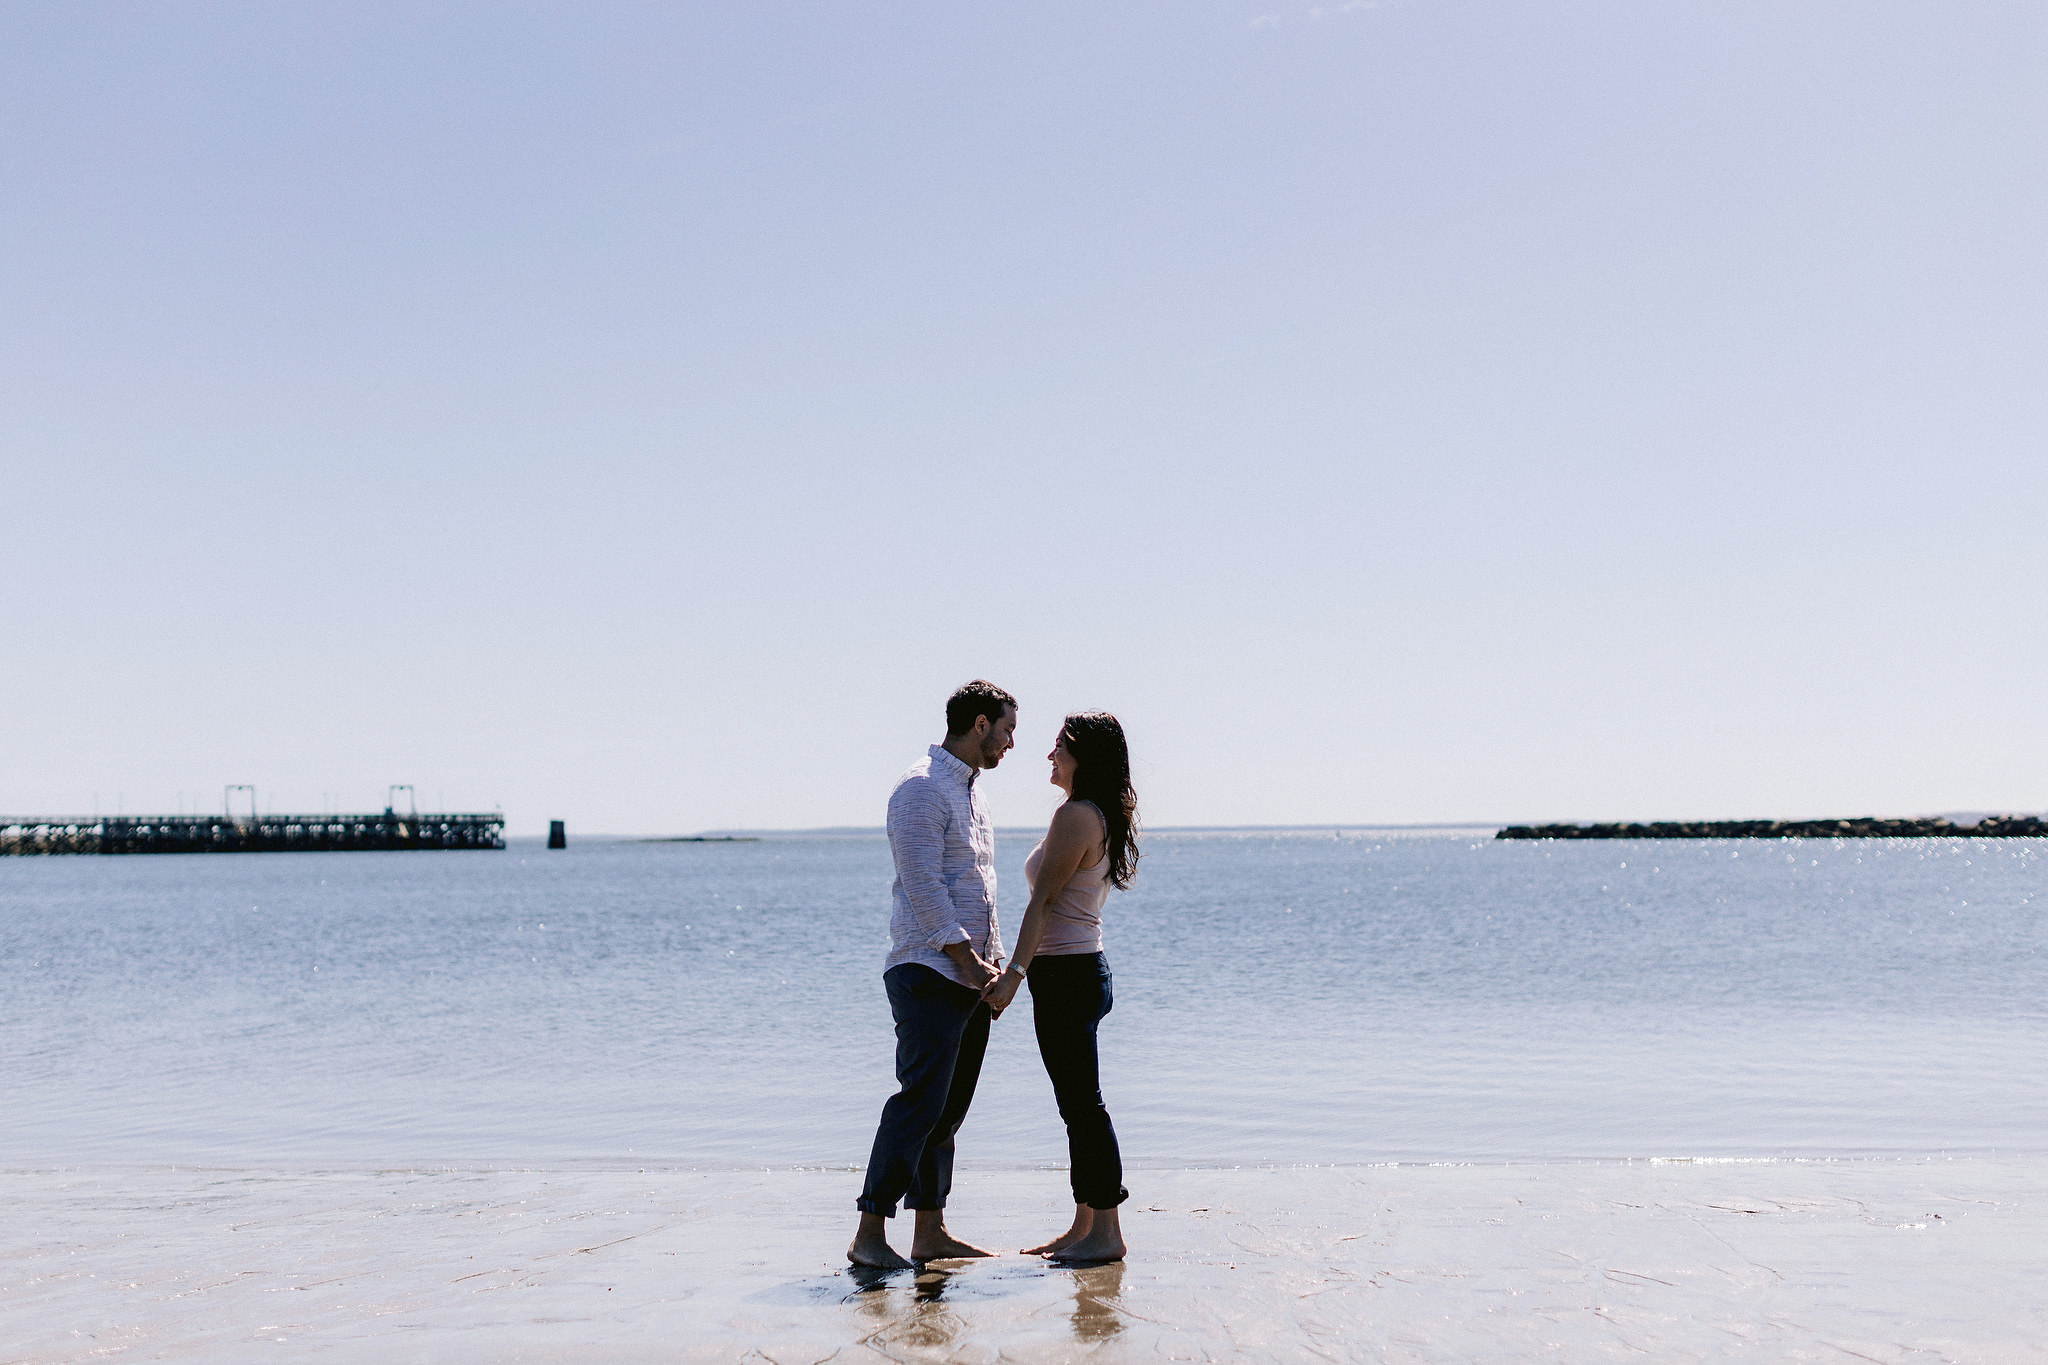 The engaged couple is romantically looking at each other on the beach in New York. Editorial image by Jenny Fu Studio